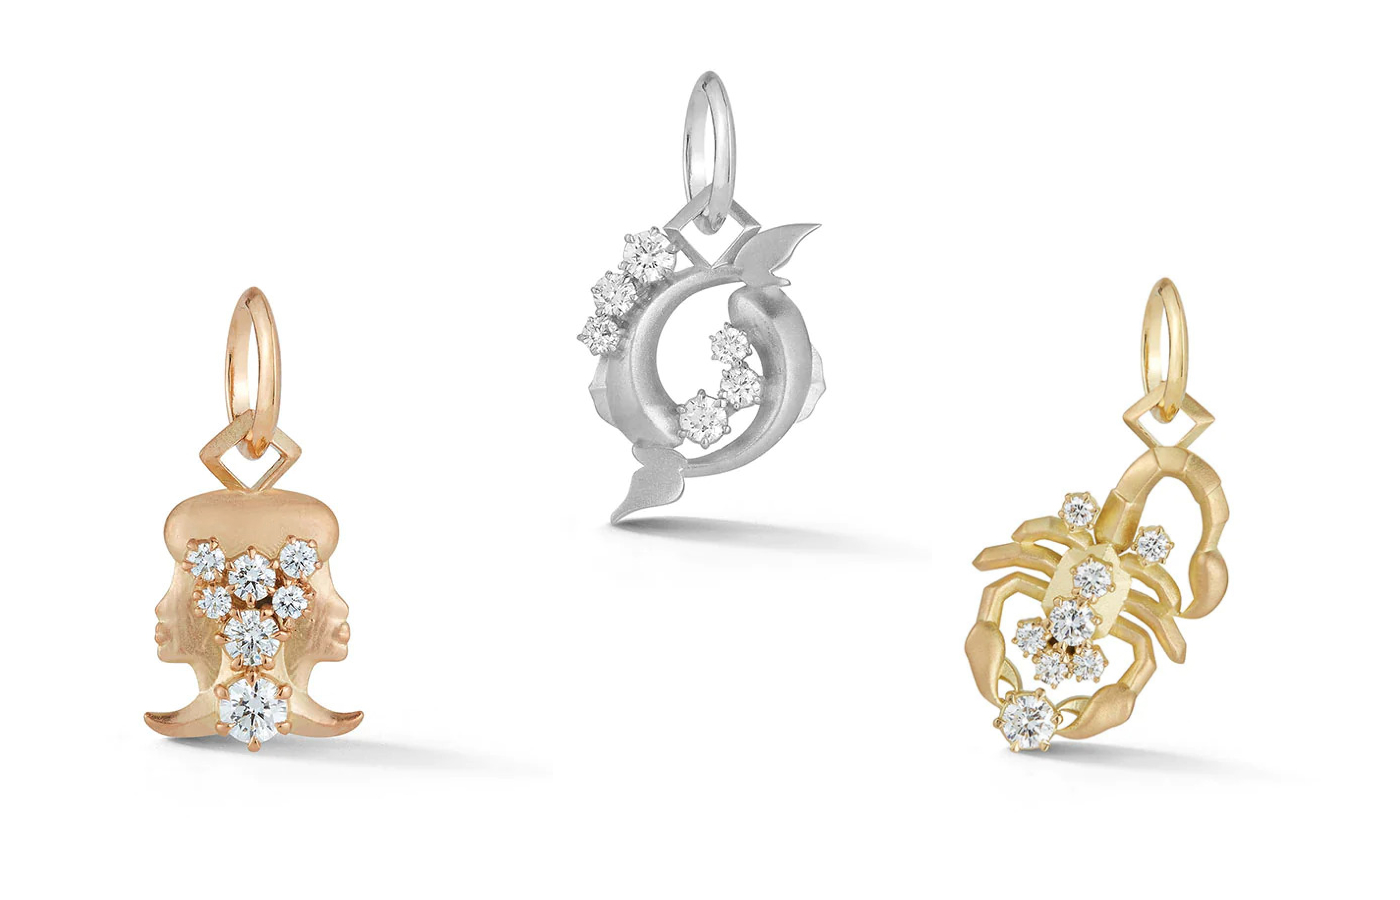 Jade Trau Zodiac charms in gold, white gold, rose gold and diamond